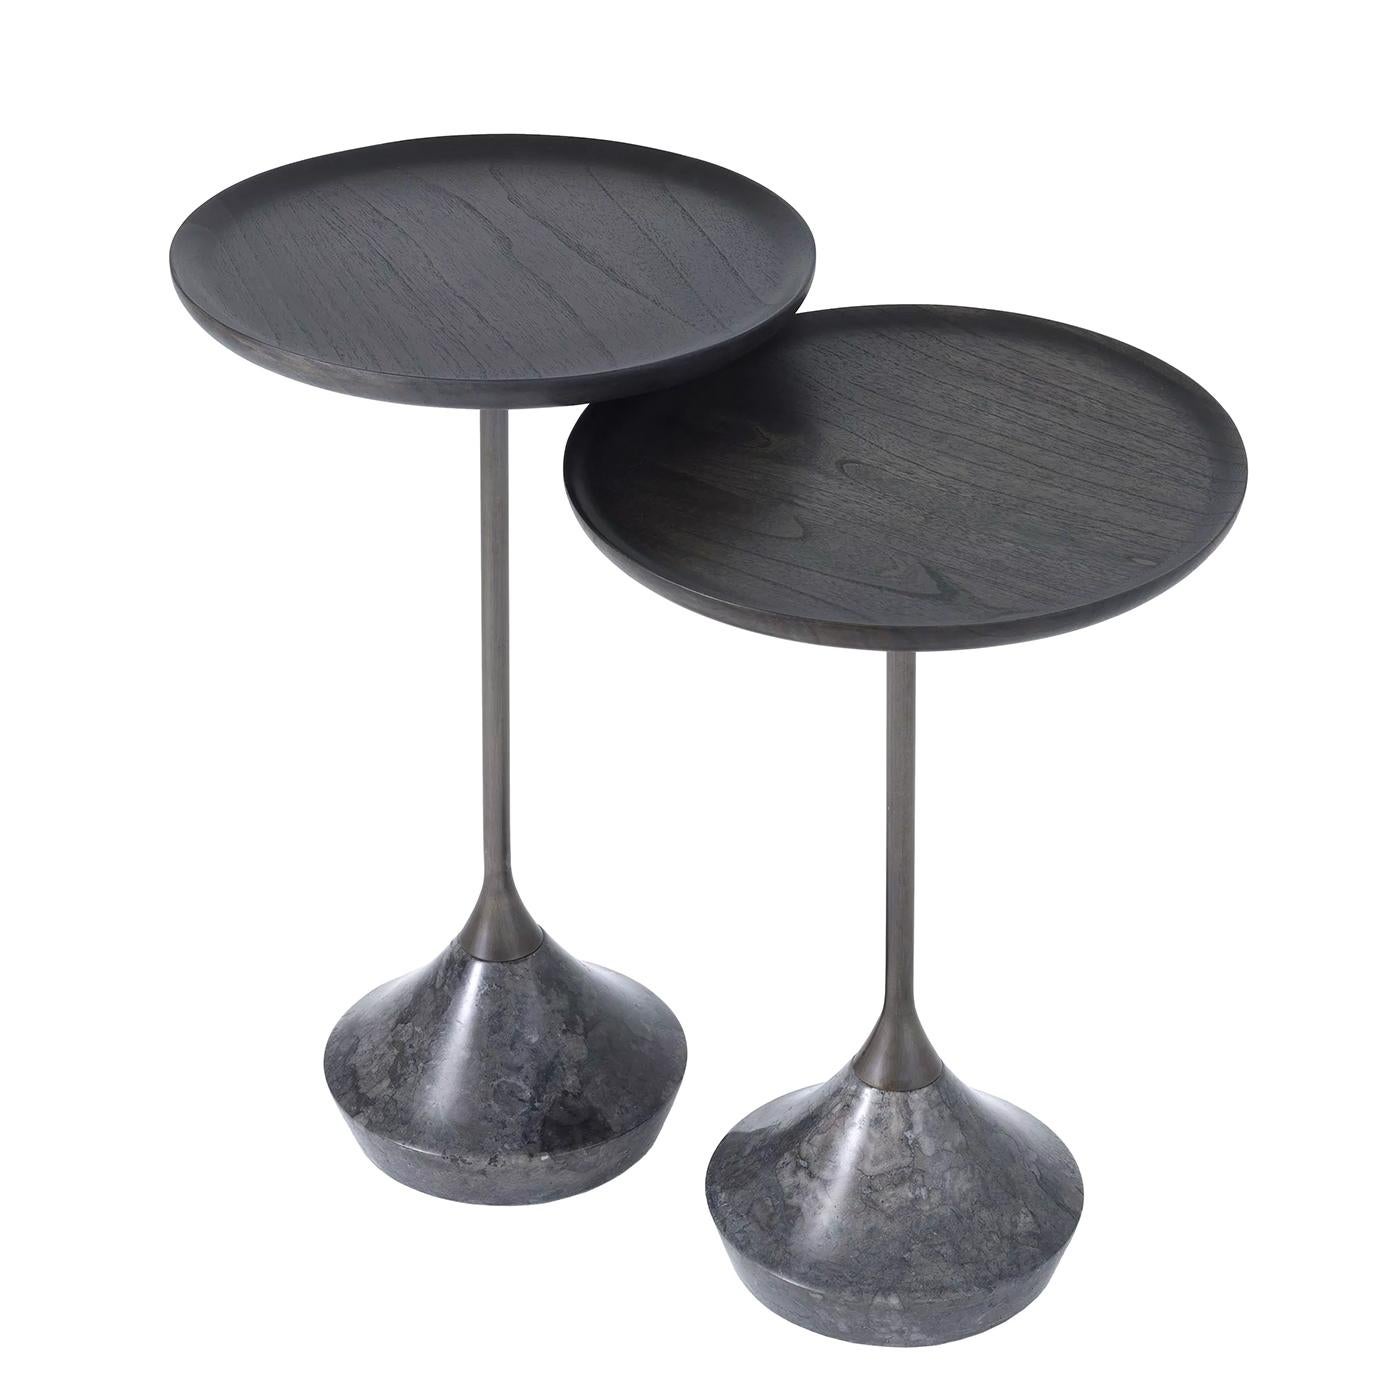 Indonesian Perini Set of 2 Side Table For Sale